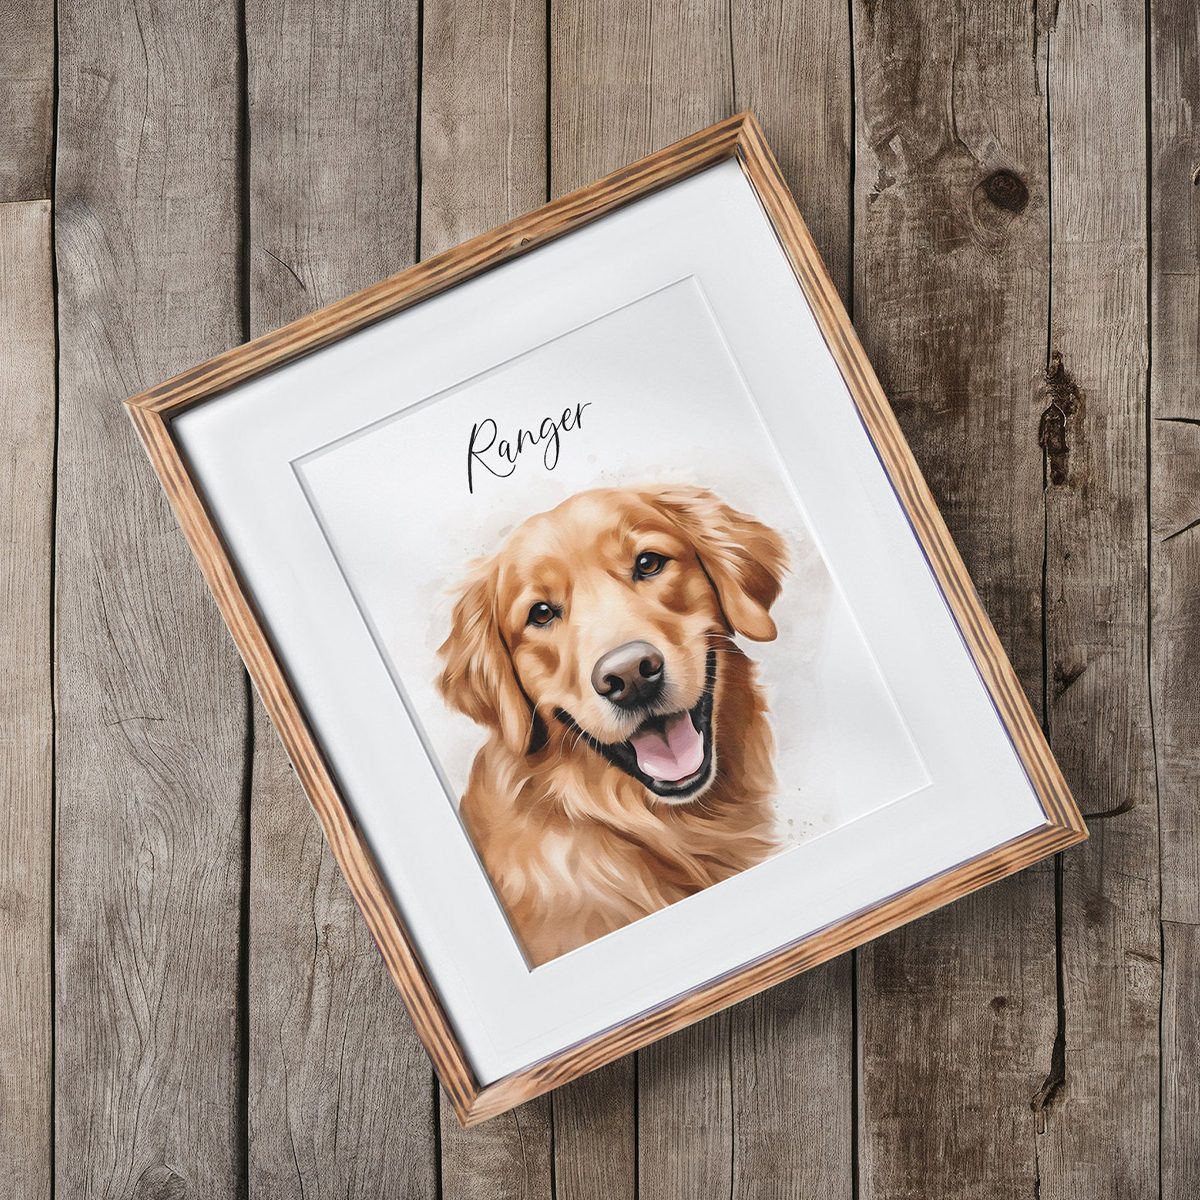 25 Fun Gifts for Dog Lovers That Have Everything [Updated]